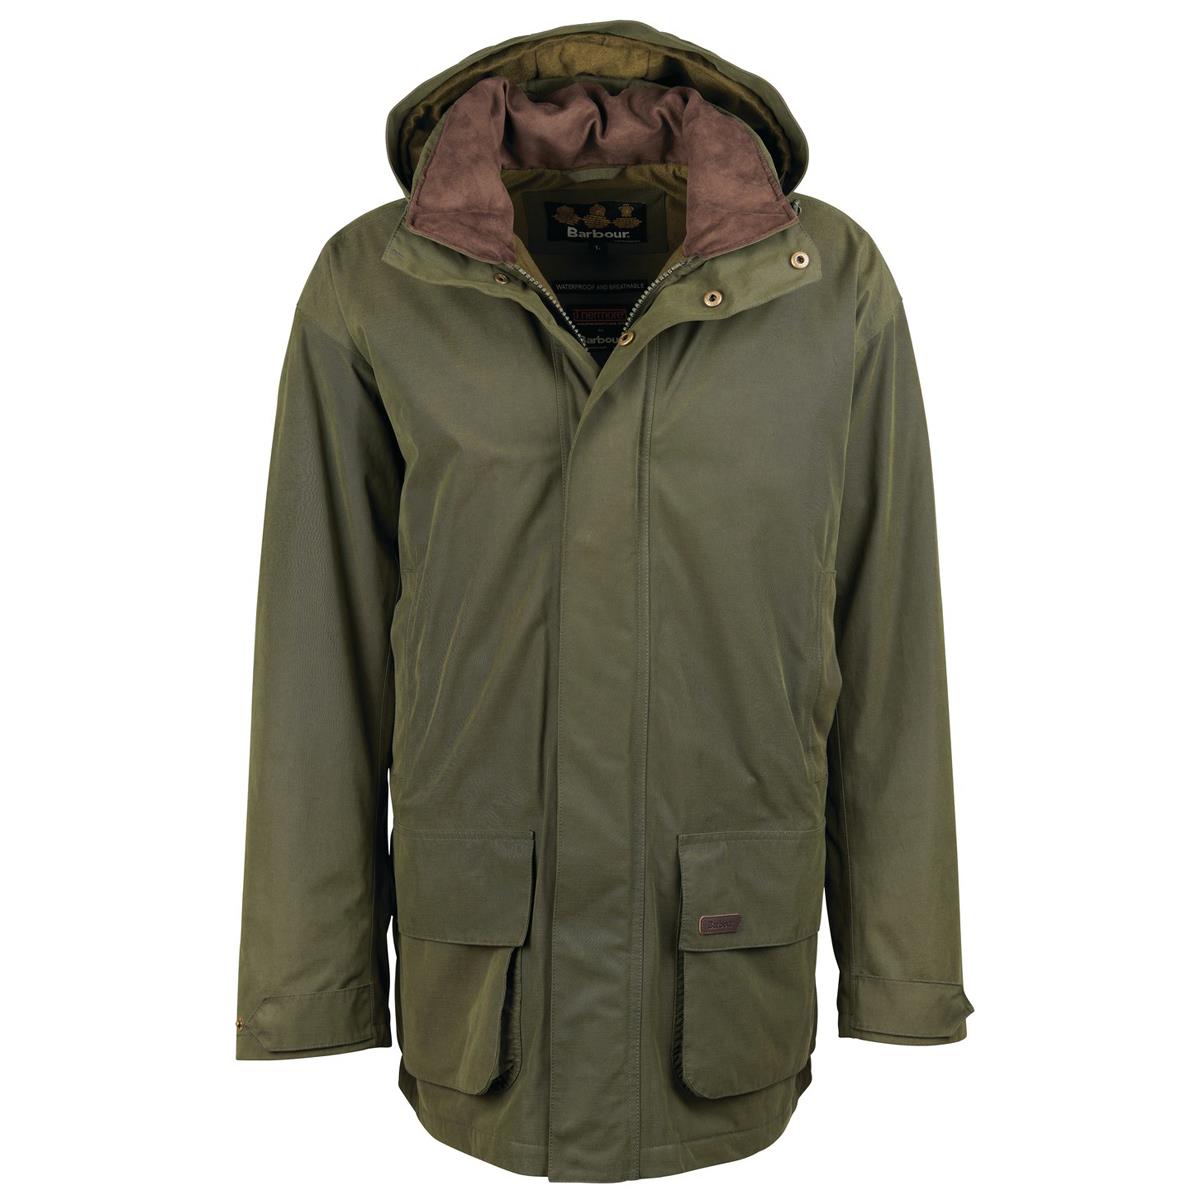 Can you describe the Barbour Beaconsfield Jacket in the Barbour Mens line?